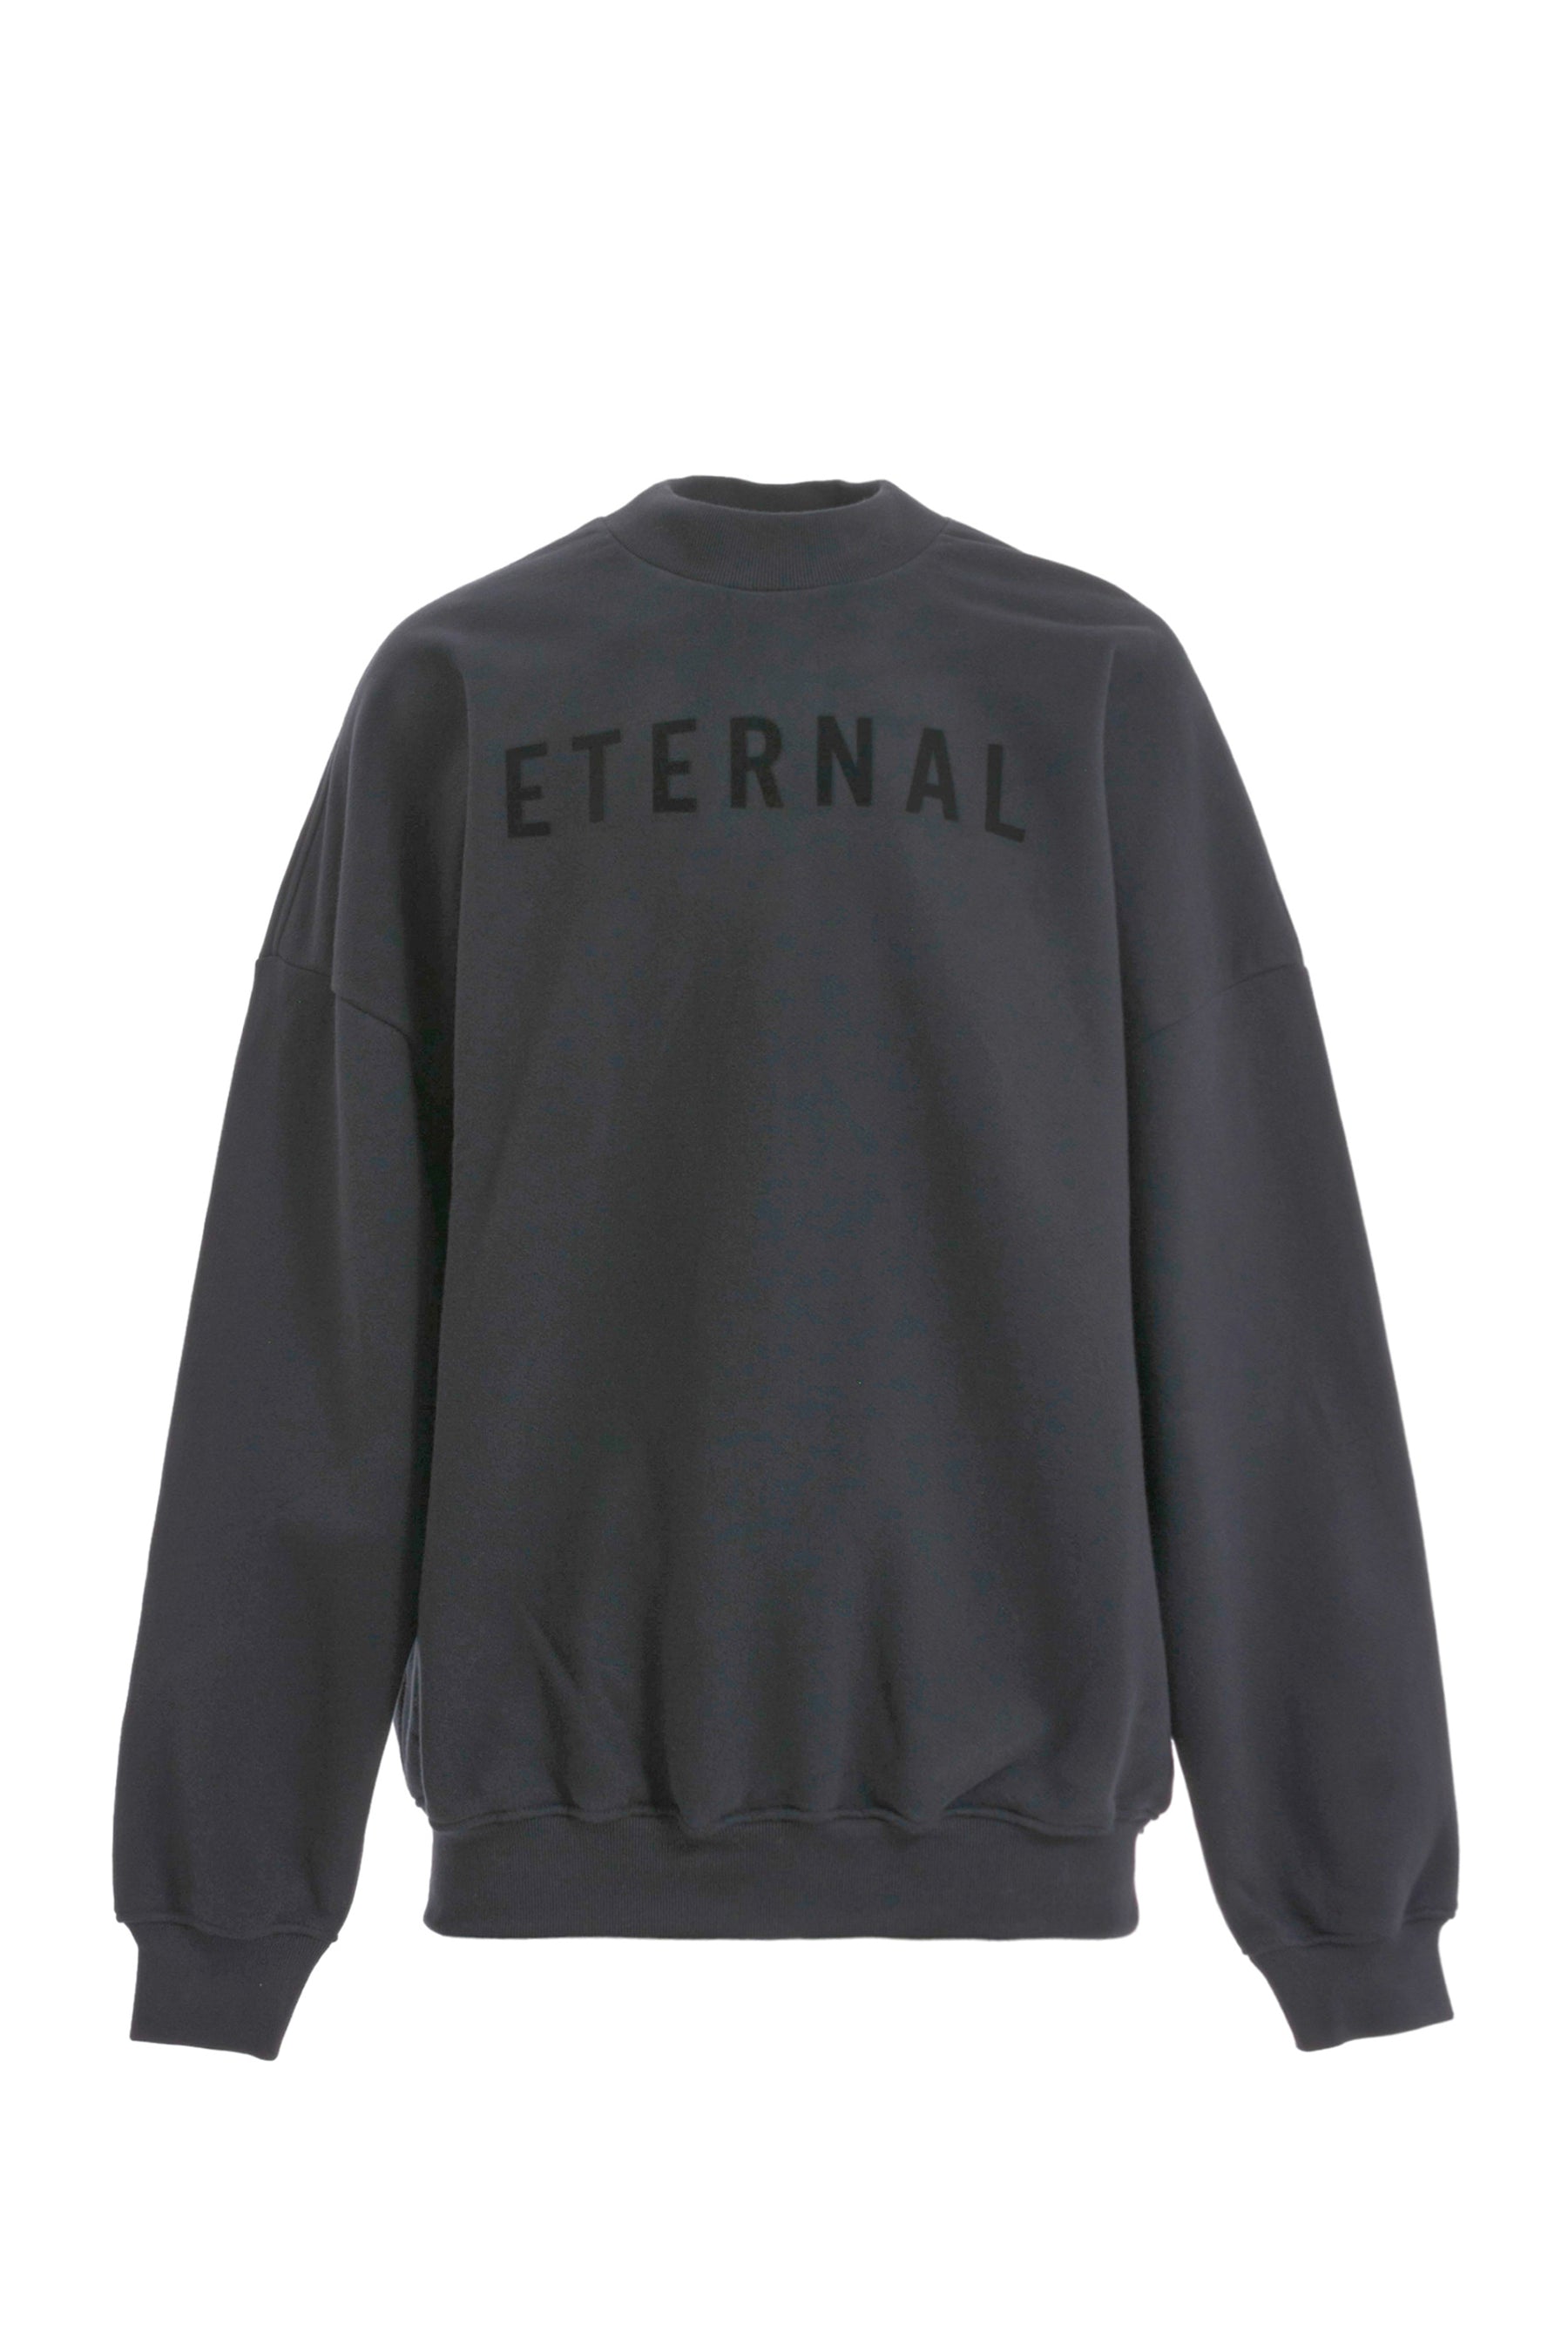 FEAR OF GOD THE ETERNAL COLLECTION フィアオブゴッド エターナル ...